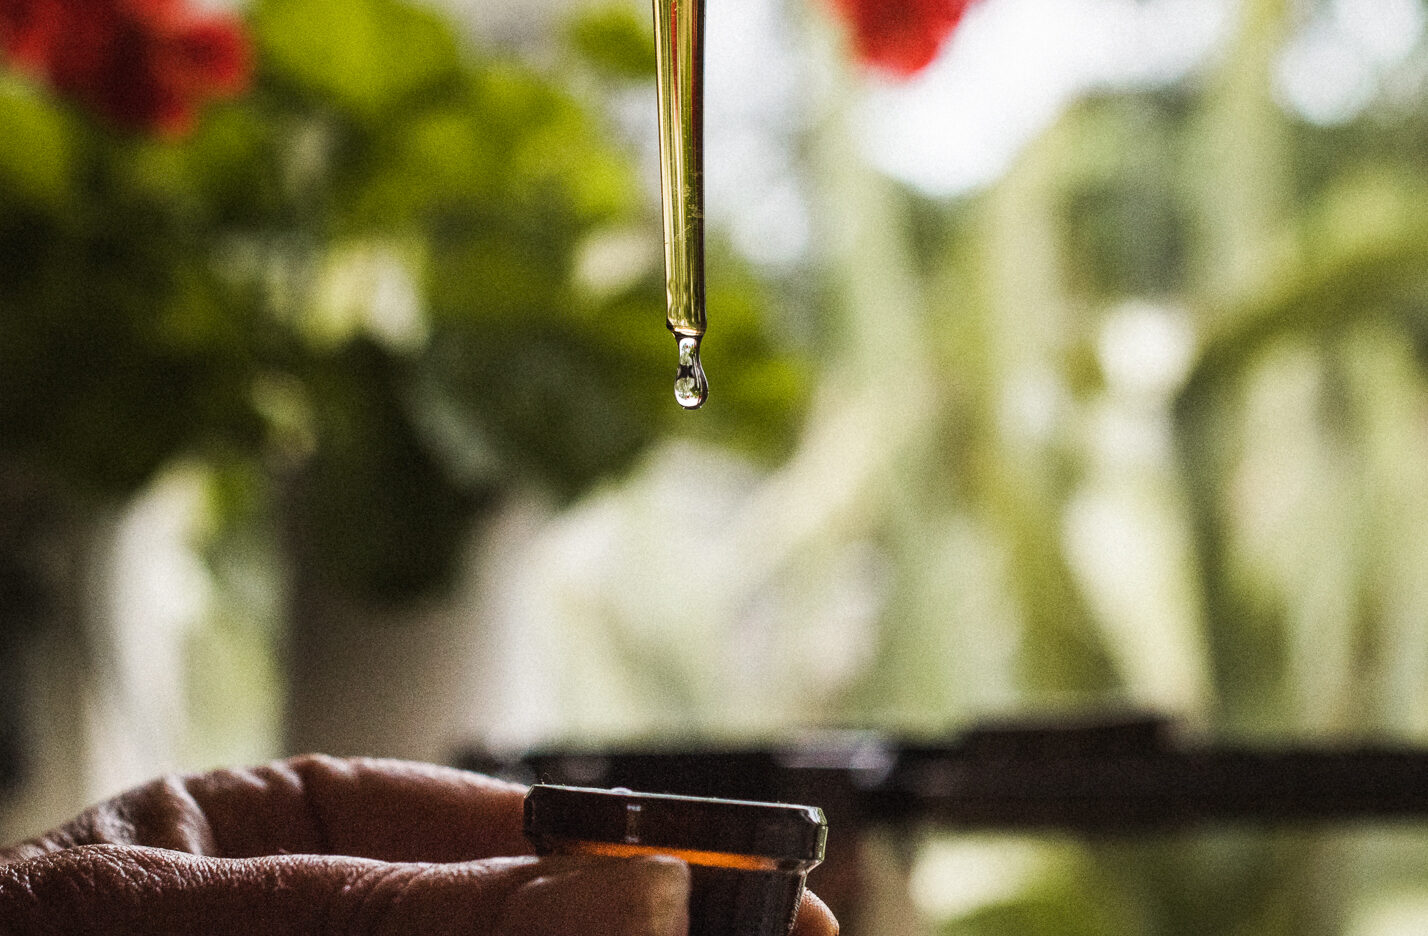 There are no essential oils in plants. Wait, what?